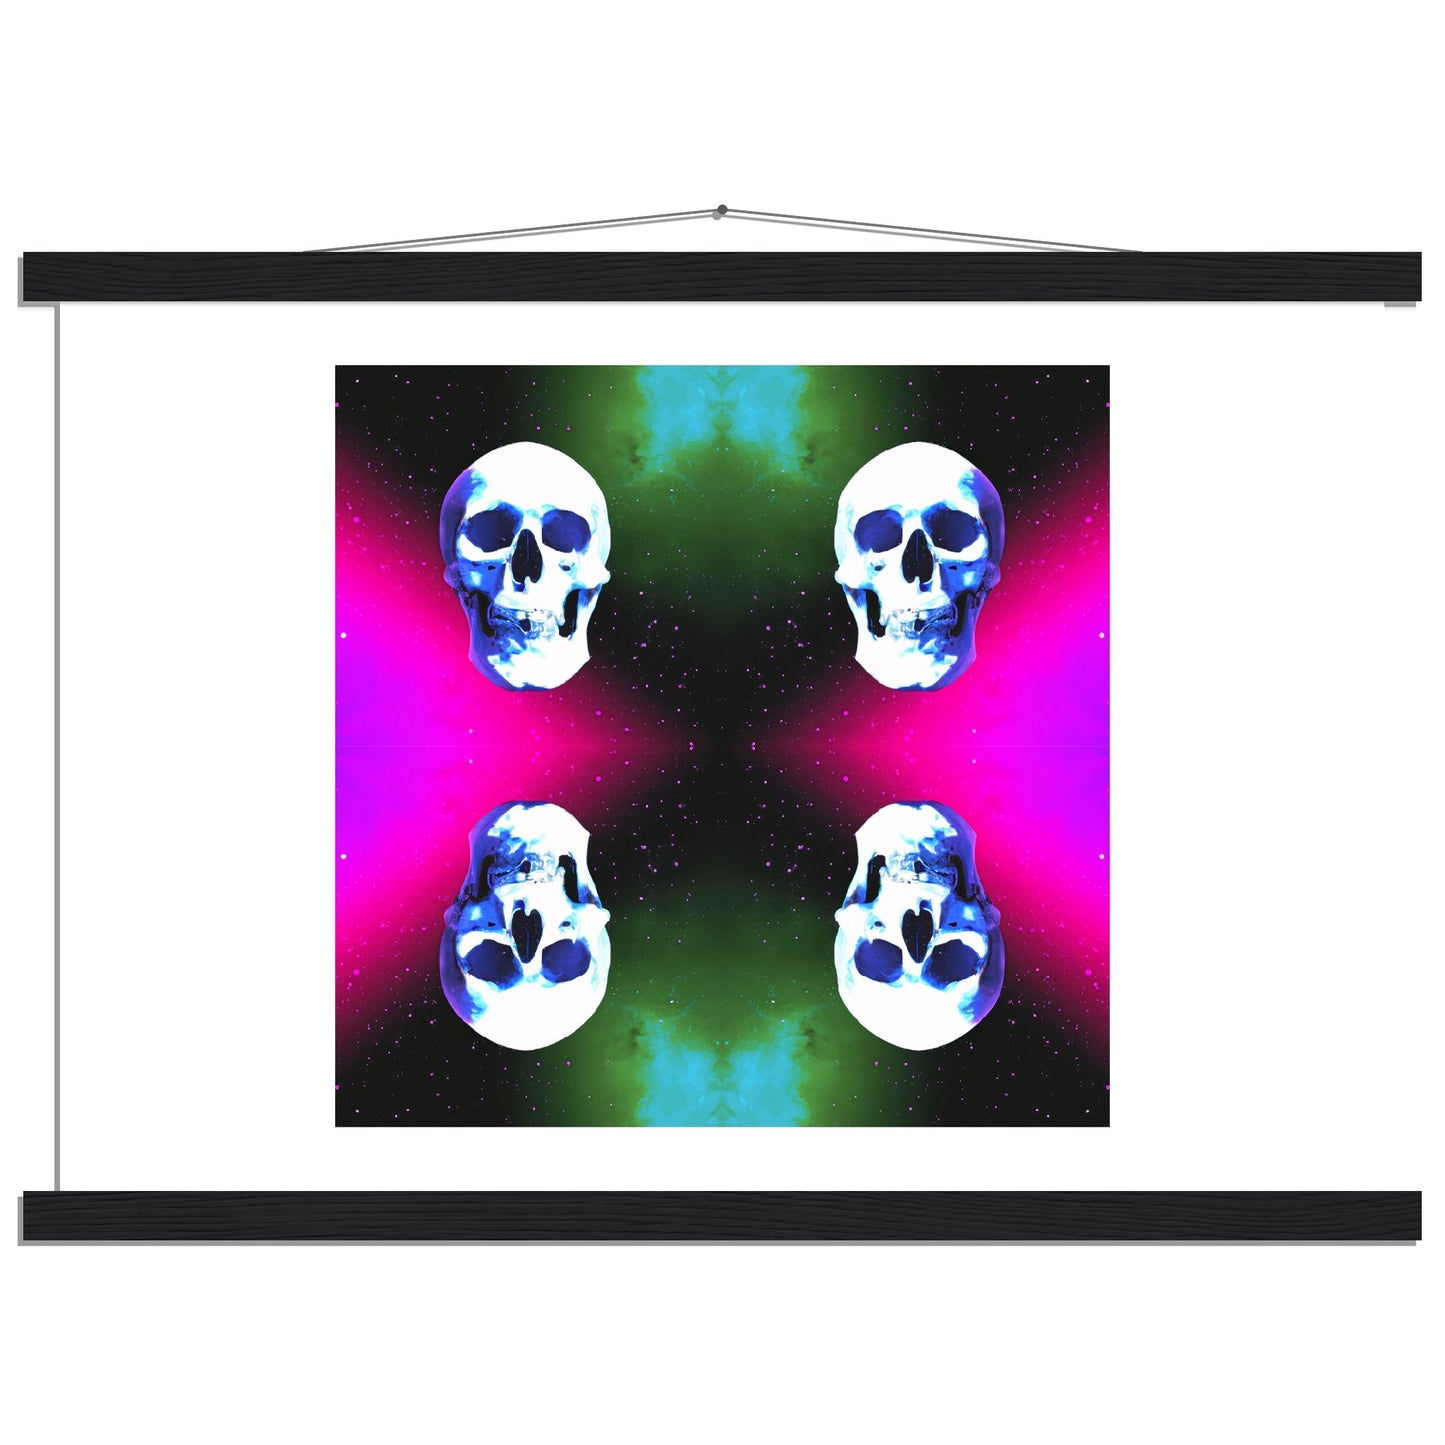 Features mirrored skulls in a cosmic purple, green and black nebula space scene.